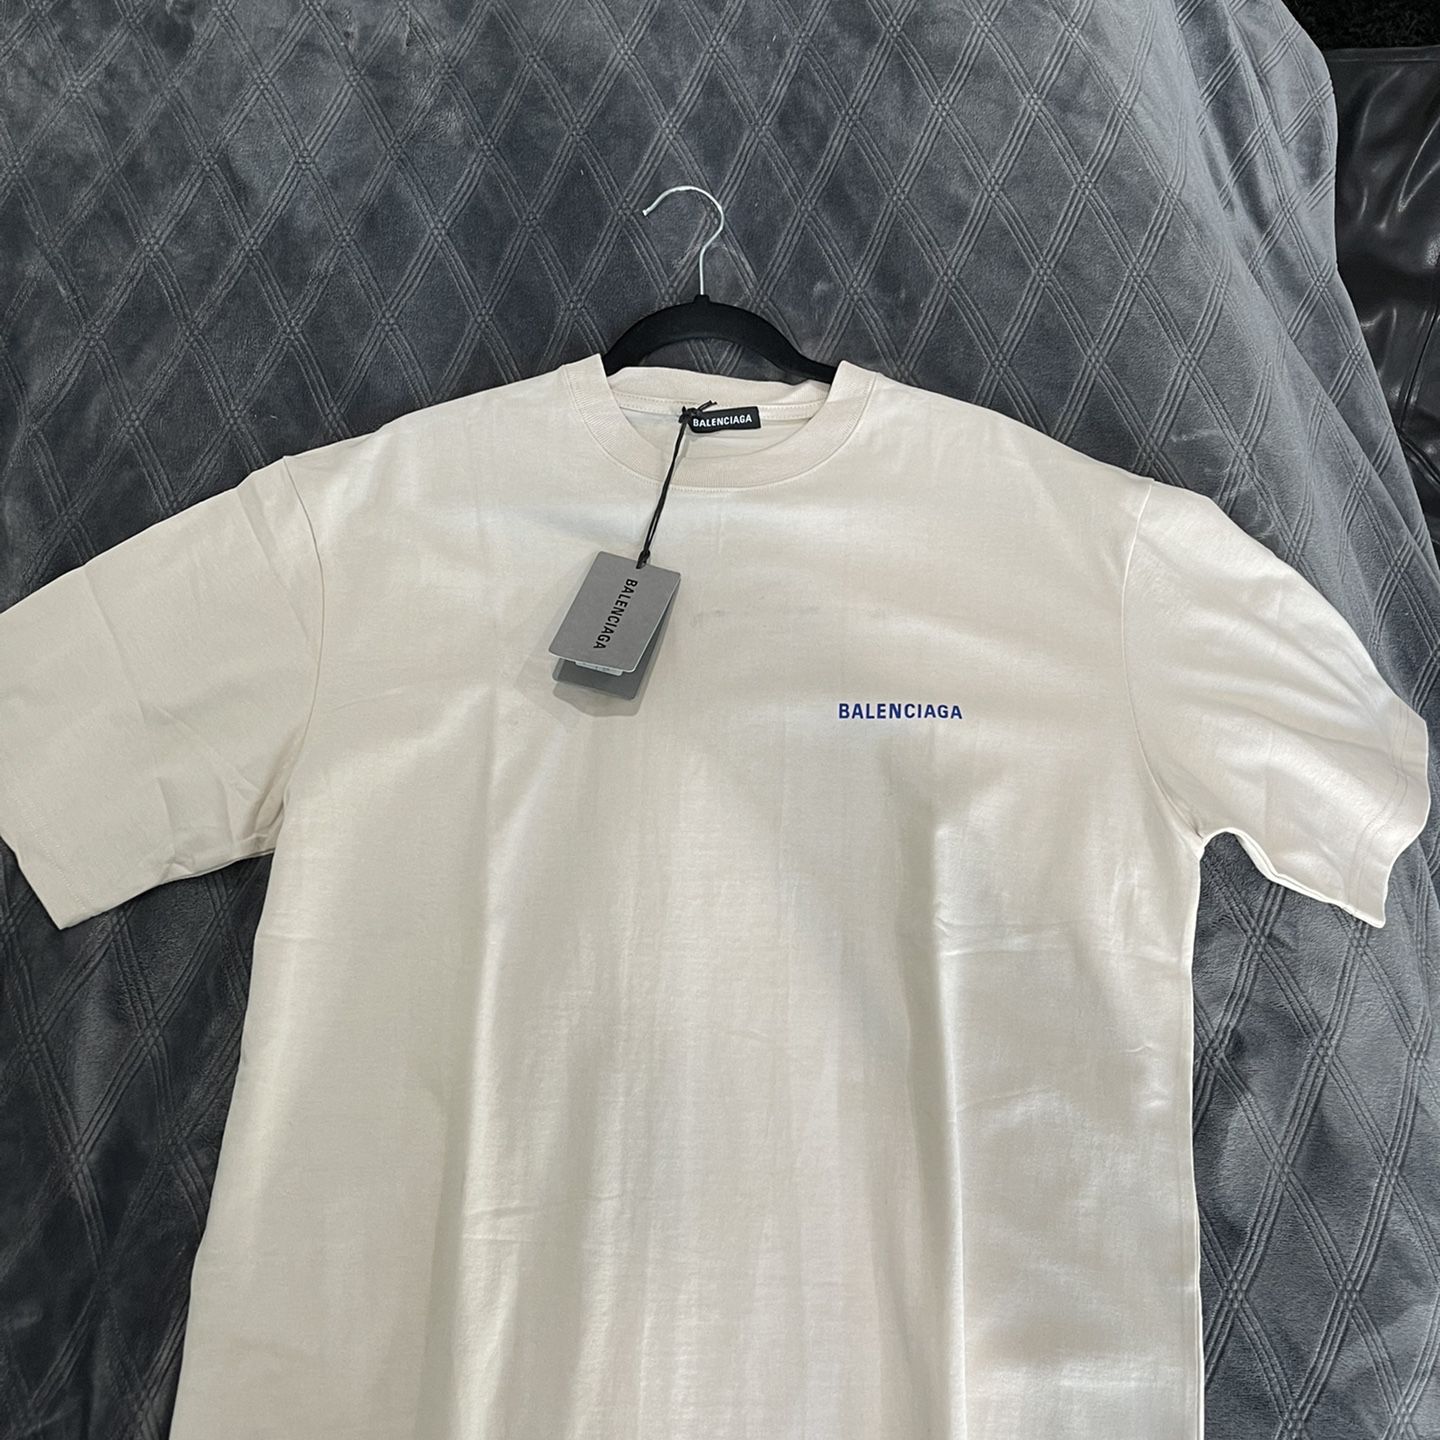 Balenciaga Black T Shirt L Size for Sale in New York, NY - OfferUp